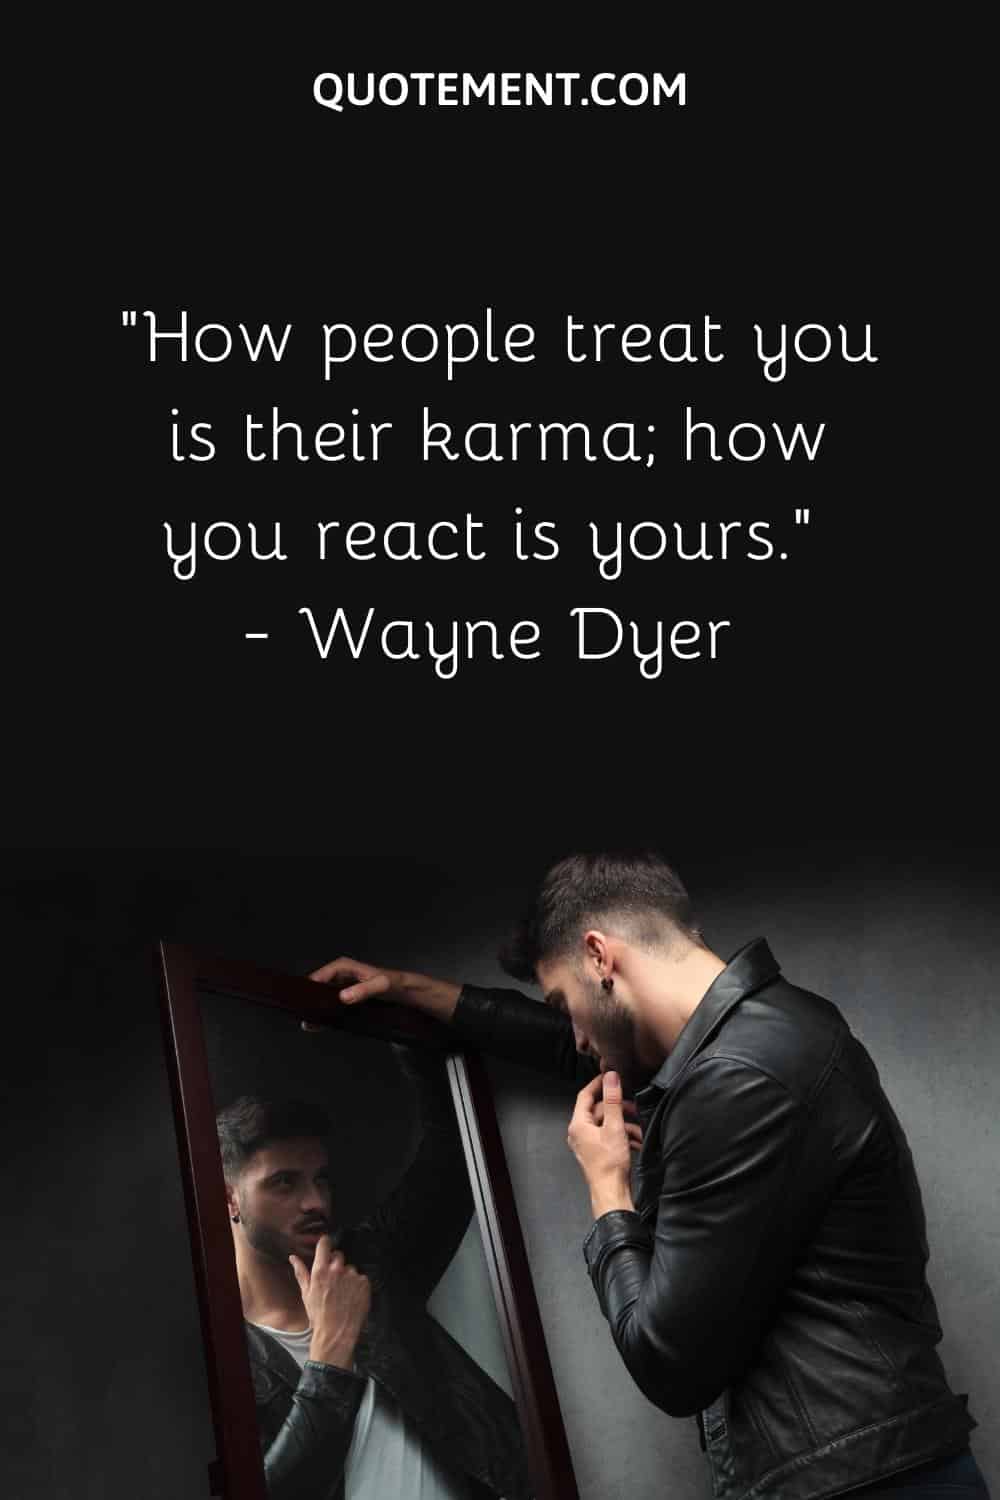 How people treat you is their karma; how you react is yours